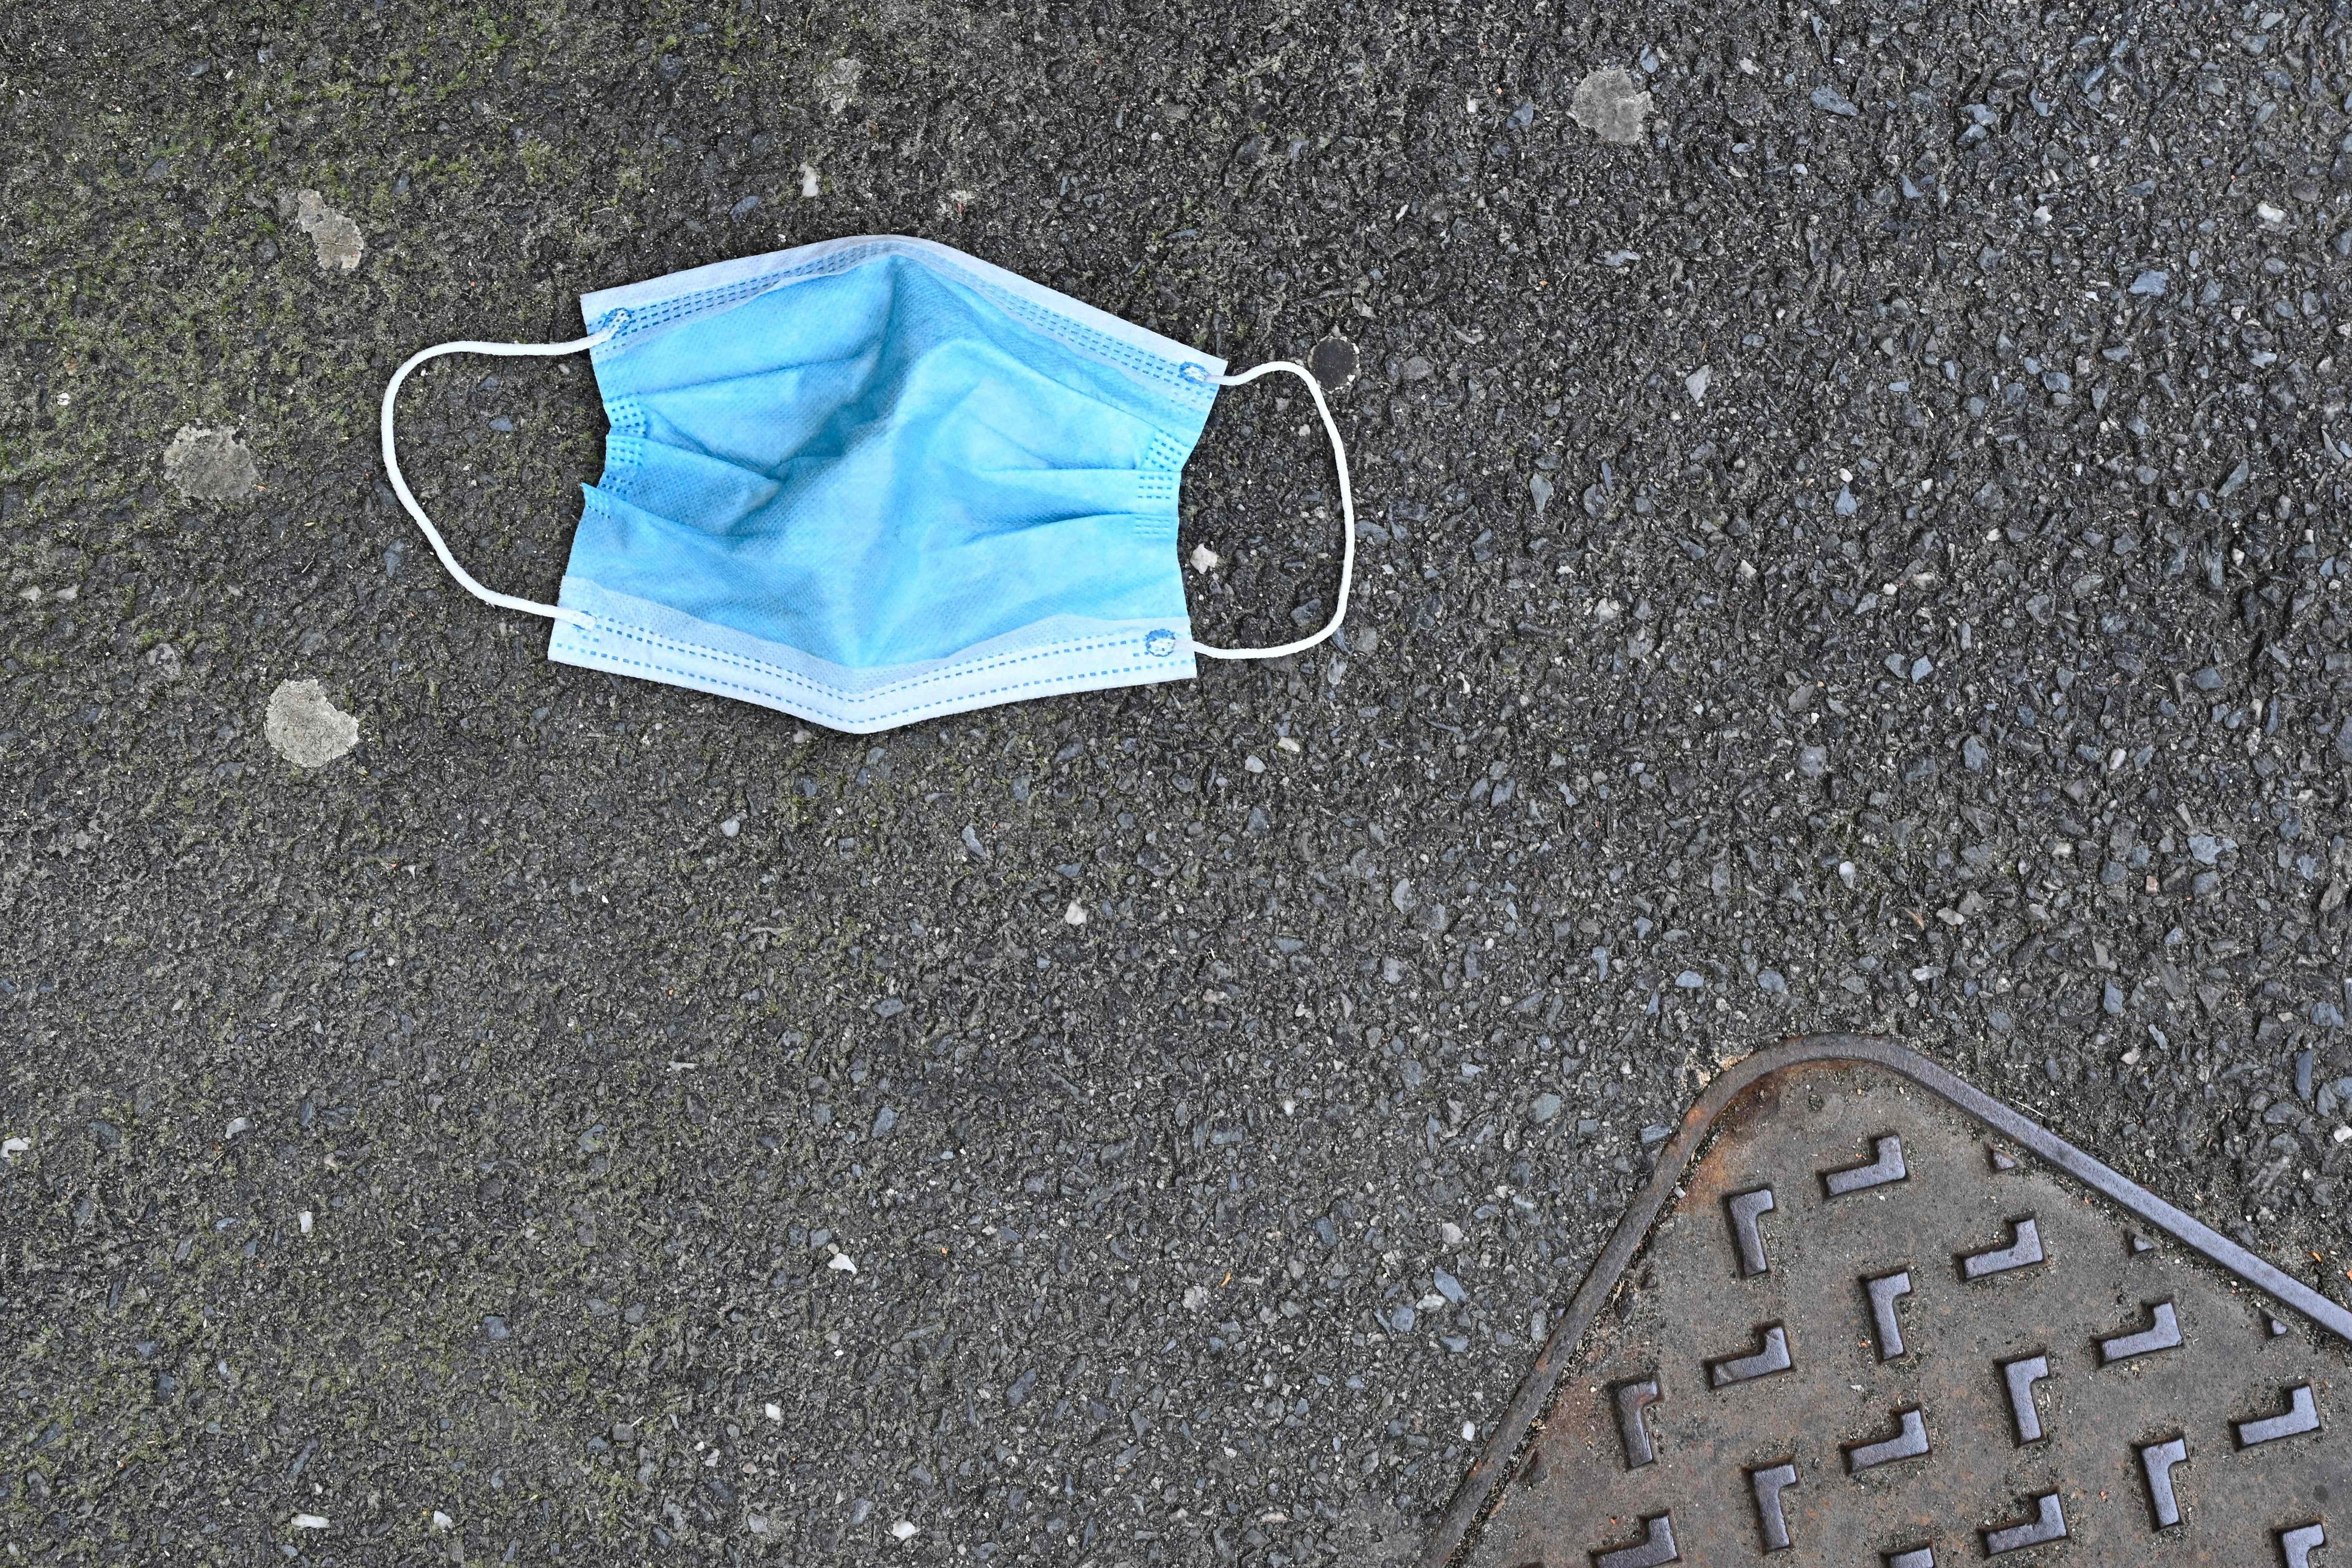 A protective face mask thrown in the street.